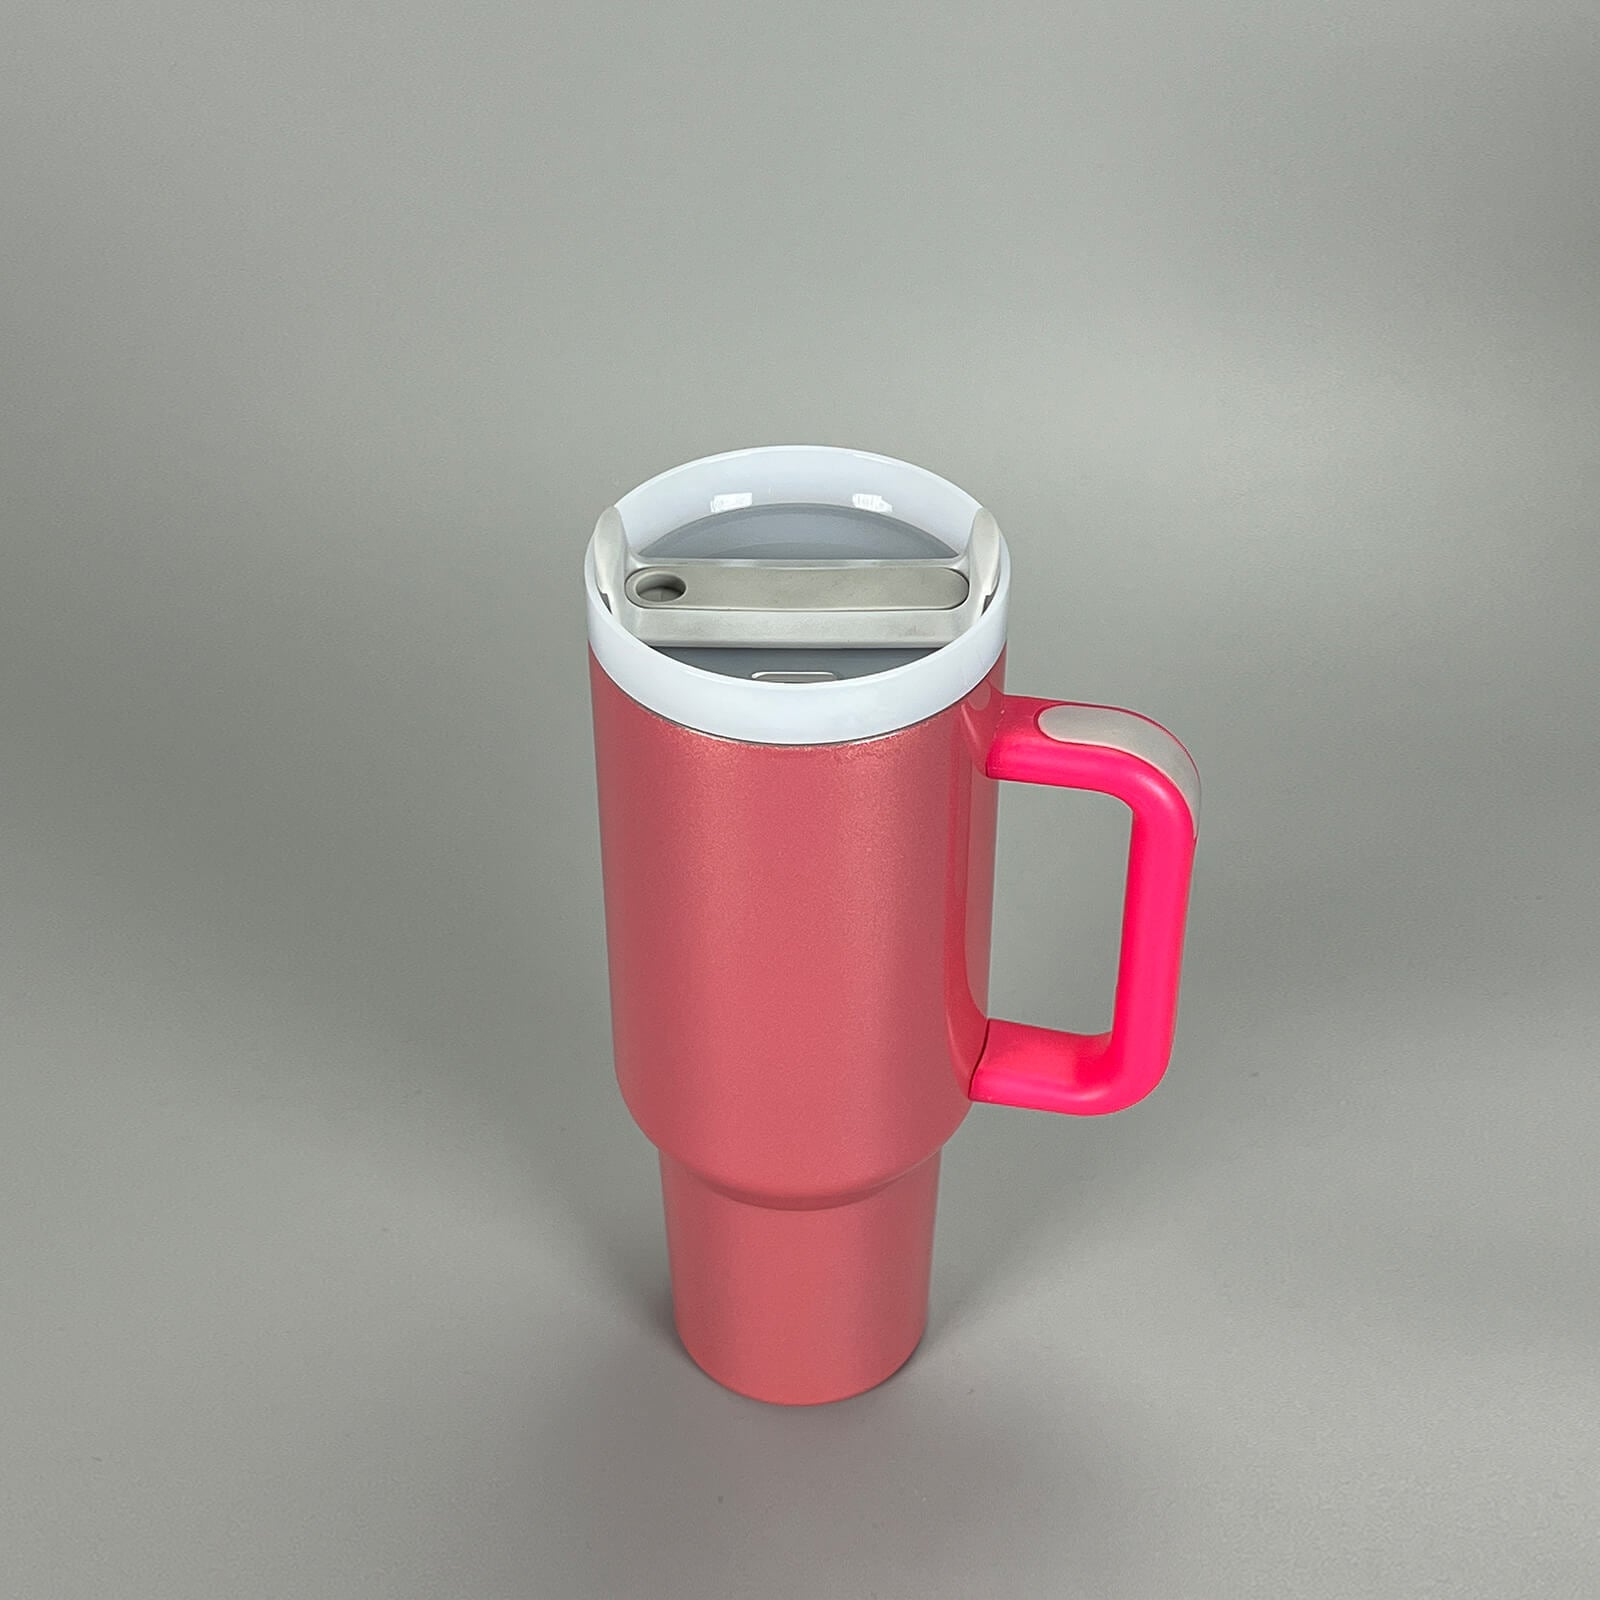 Glitter Sublimation Tumbler, 40oz Glow In The Dark Sublimation Tumbler, sublimation 40 oz tumbler, 40oz Steel tumbler, sublimation tumblers wholesale, 40 oz tumbler sublimation, sublimation tumbler with handle, sublimation 40 oz tumbler with handle, 40 oz tumbler with handle wholesale, 40 oz sublimation tumblers, sublimation tumblers with handles, 40oz sublimation tumbler with handle, 40oz tumbler with handle sublimation, 40 oz sublimation tumbler, white tumbler, green tumbler, purple tumbler , red tumbler